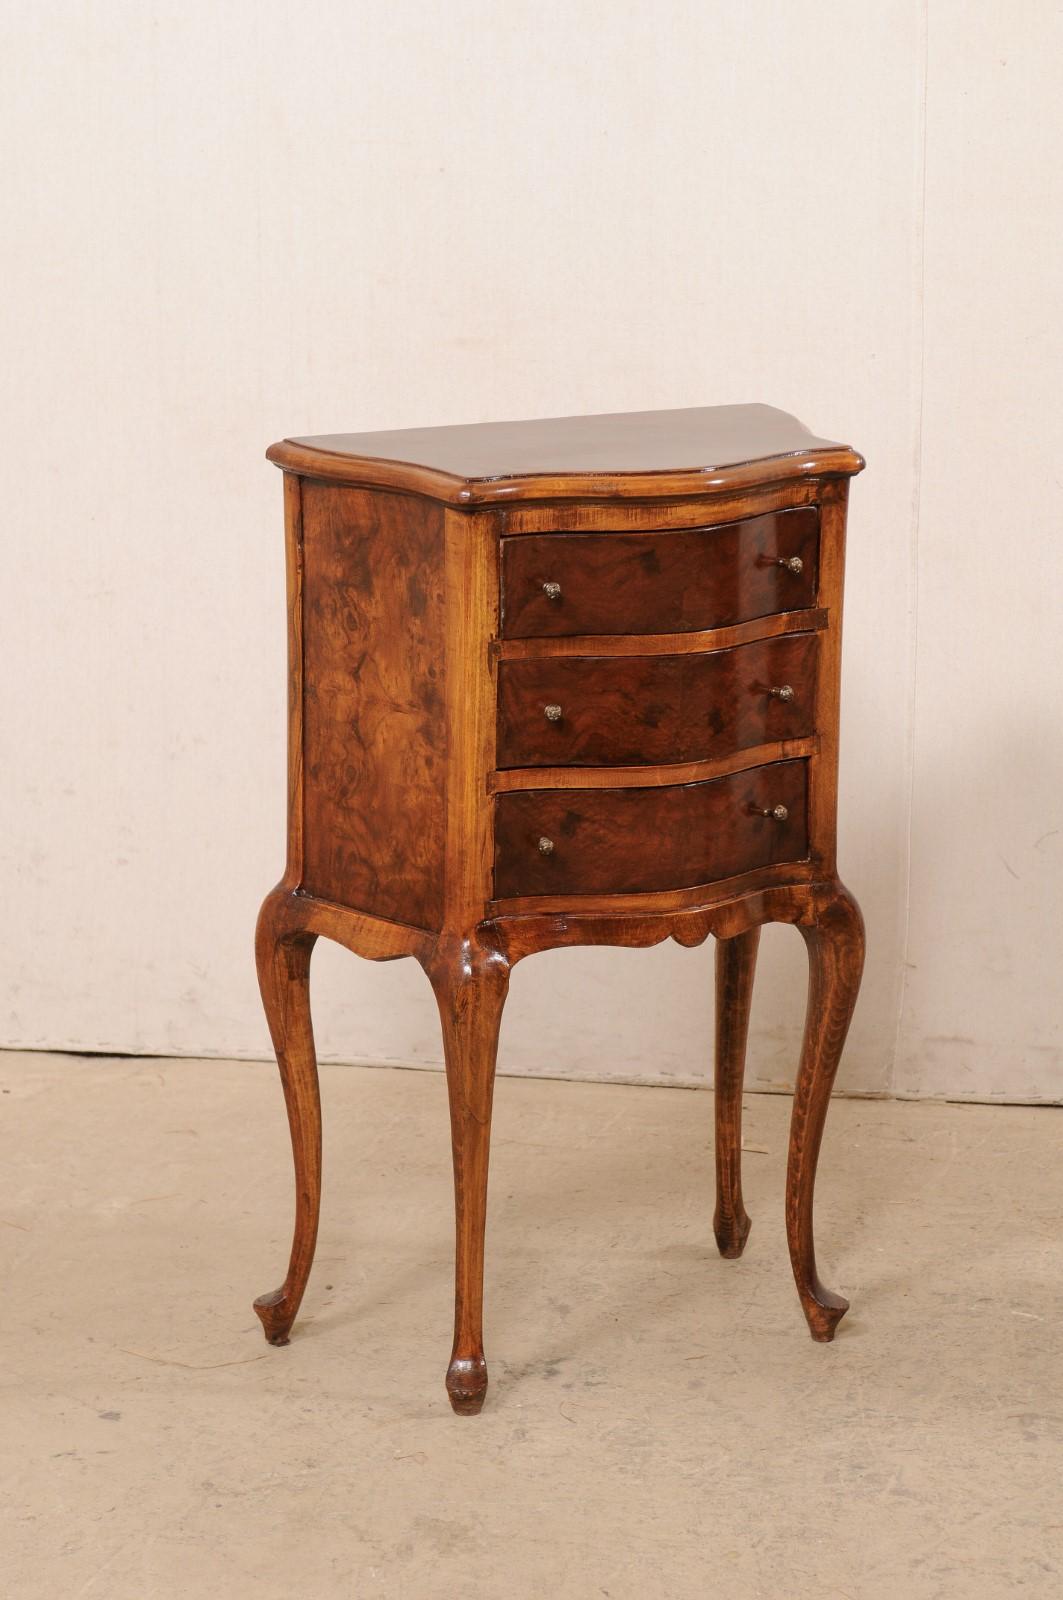 A French pair of raised three-drawer side chests from the mid-20th century. These antique commodes from France each feature a graceful serpentine shaped front and curvy sides, with rear being spread wider than frontside. The fruit wood is